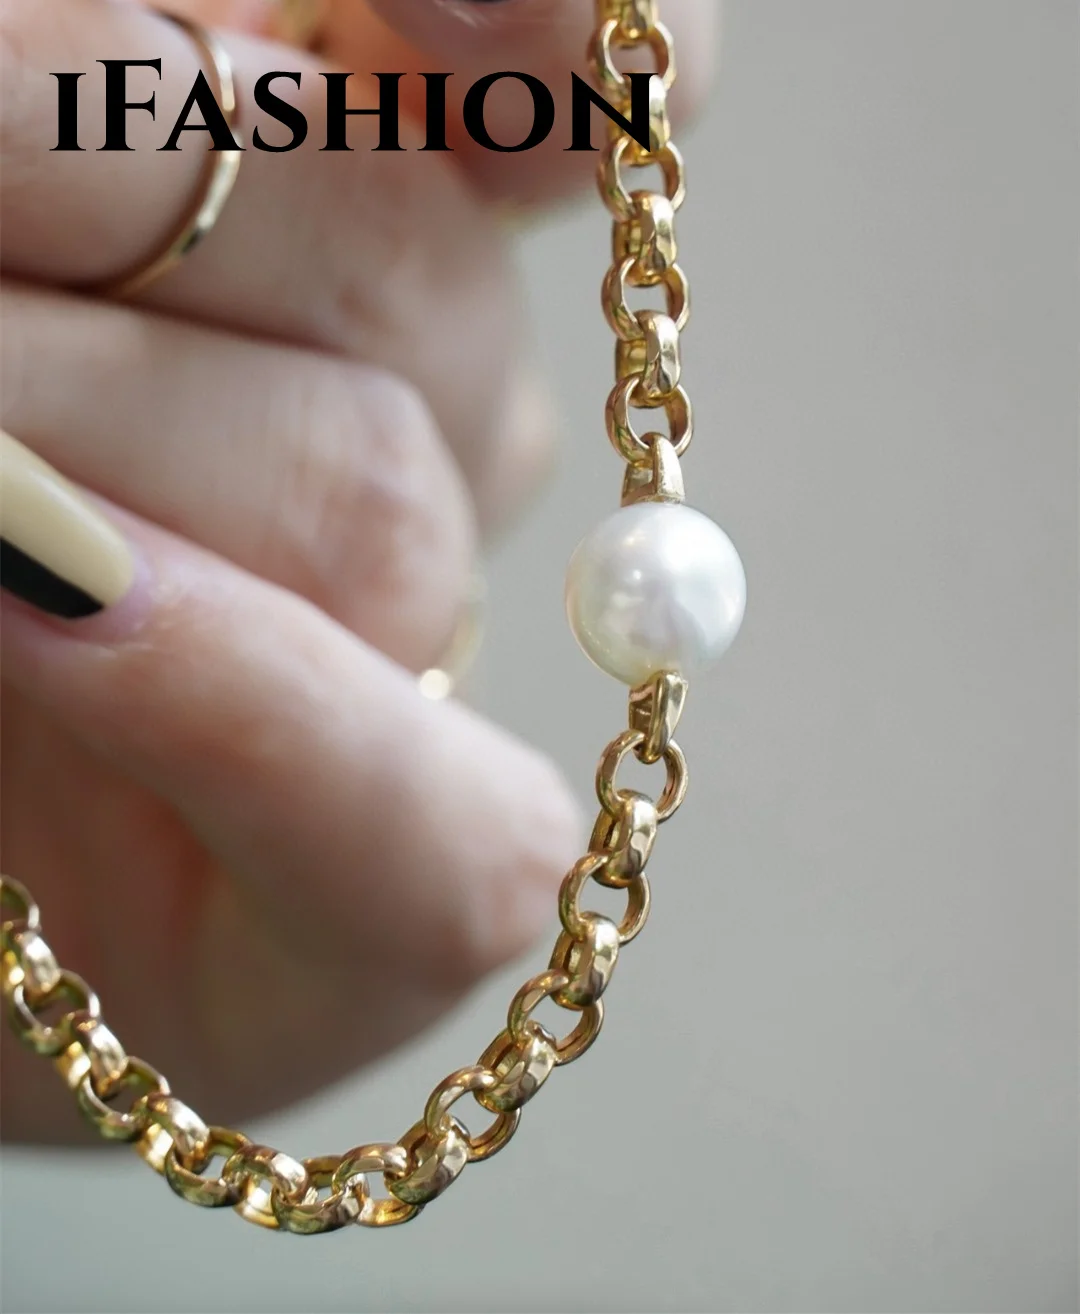 

IFASHION Bracelet Chain Natural Sea Pearl Akoya 18K Solid Yellow Gold (AU750)Italian Craft Imported Chain Pig Nose Women